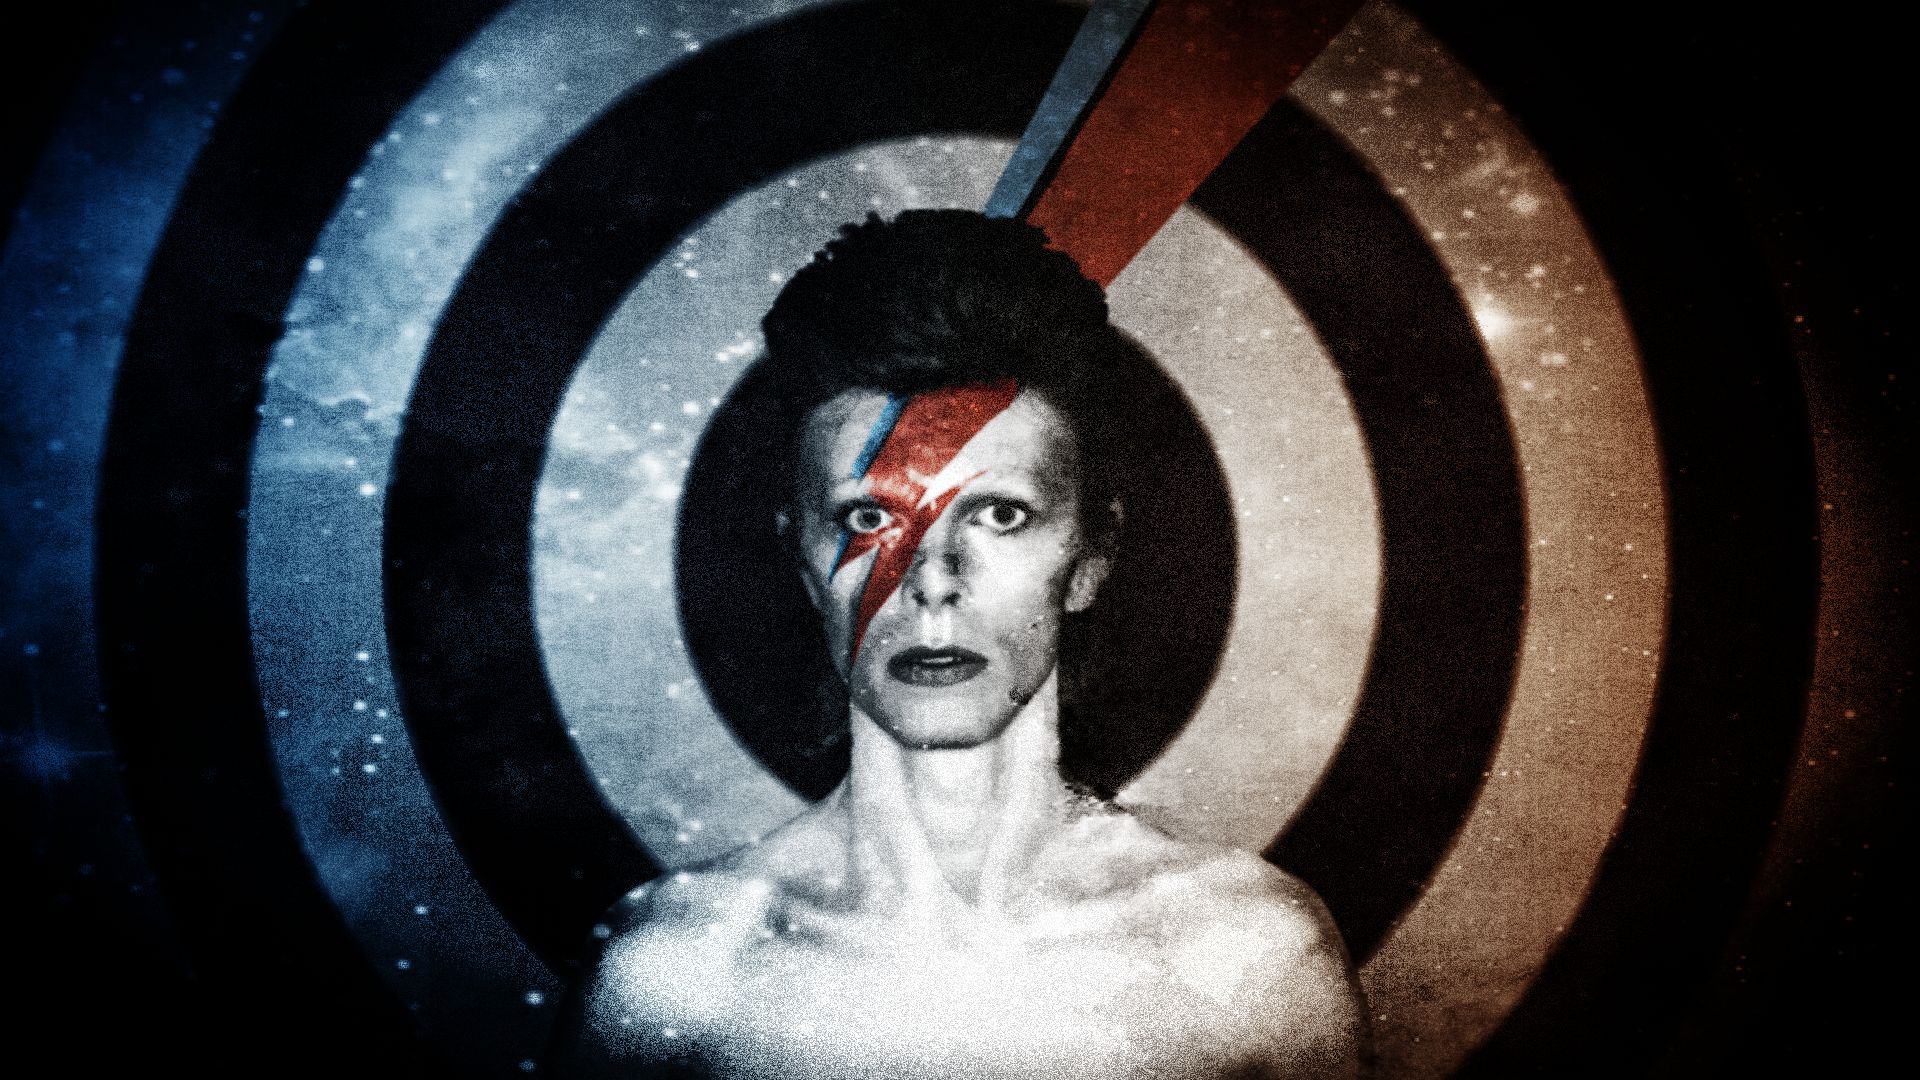 music, david bowie, album cover, singer for android